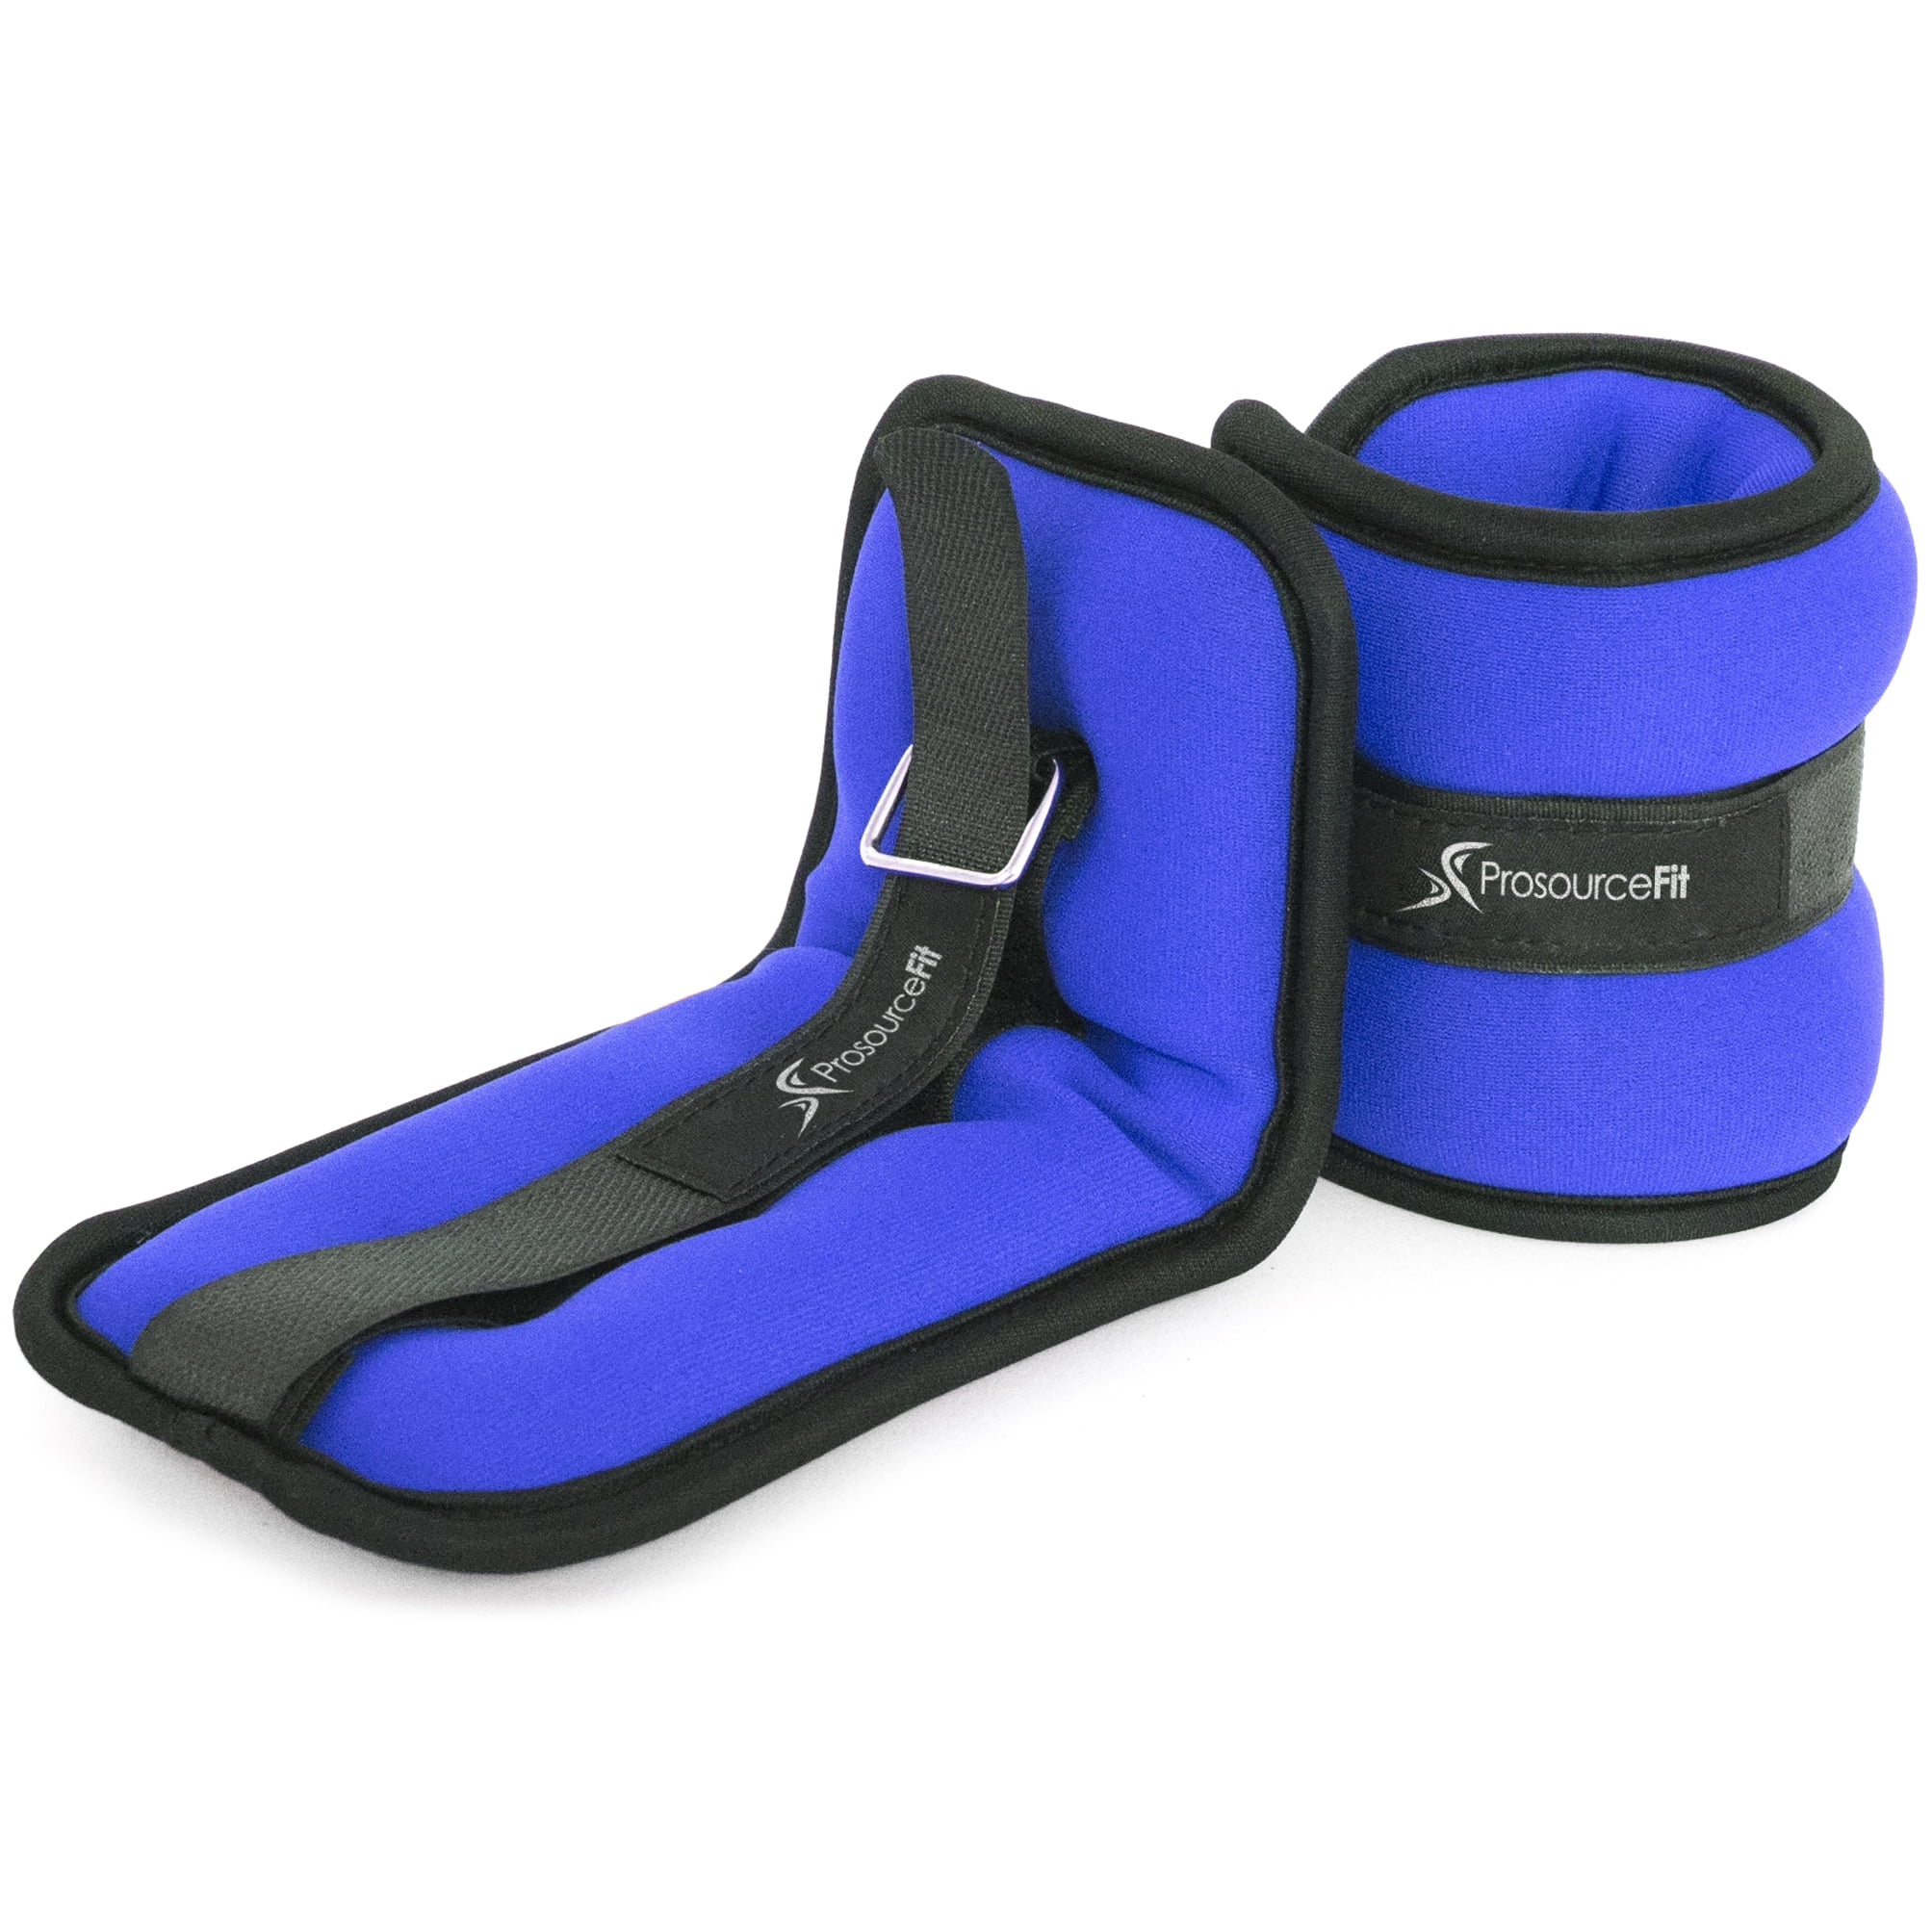 ProsourceFit Ankle Weights 3 lb, Set of 2, Blue